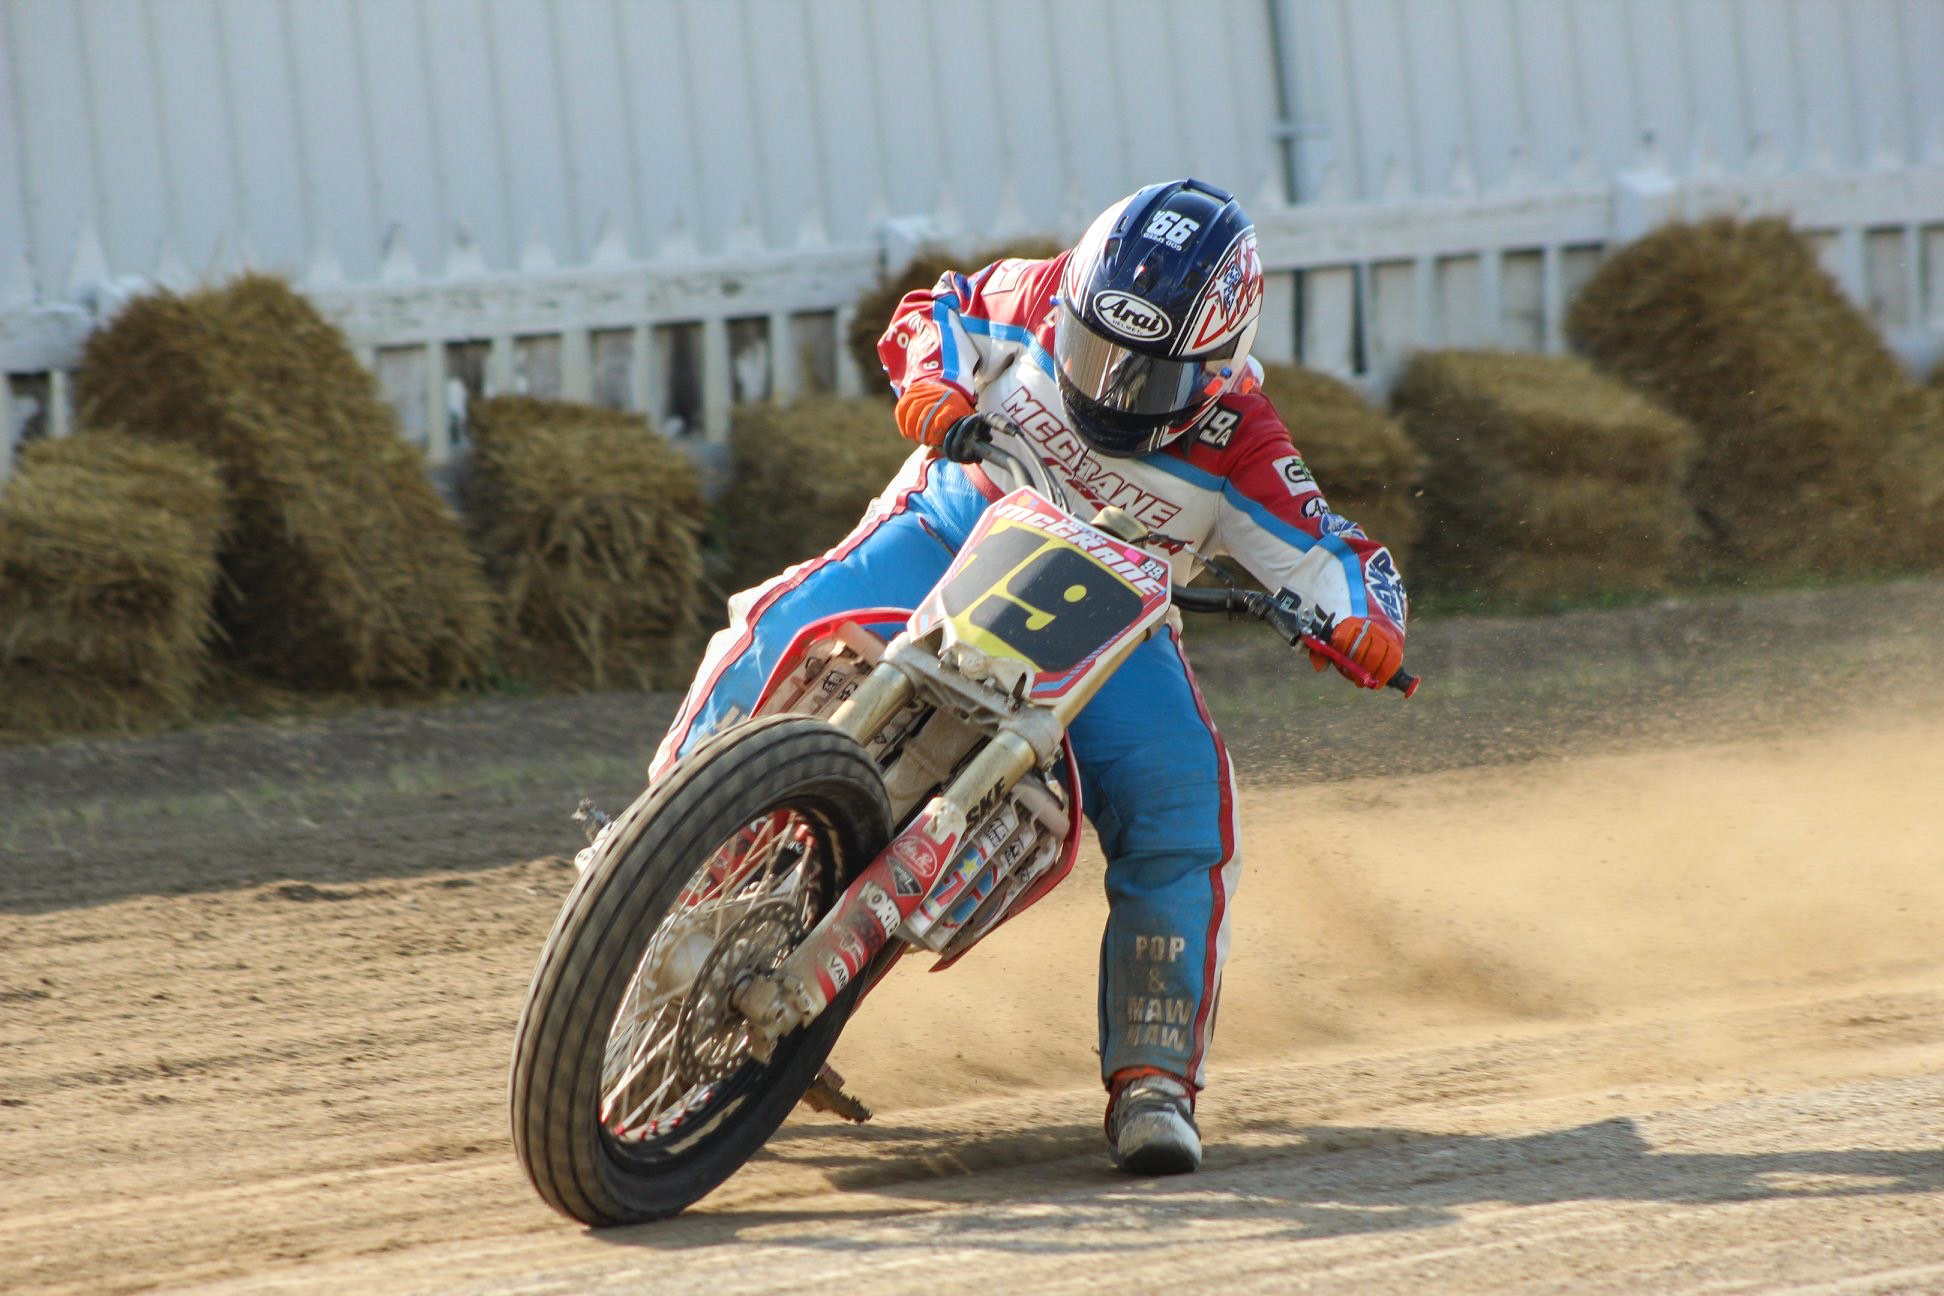 The Ins And Outs Of Converting A Motocross Bike To A Flat Track Singles Race Machine